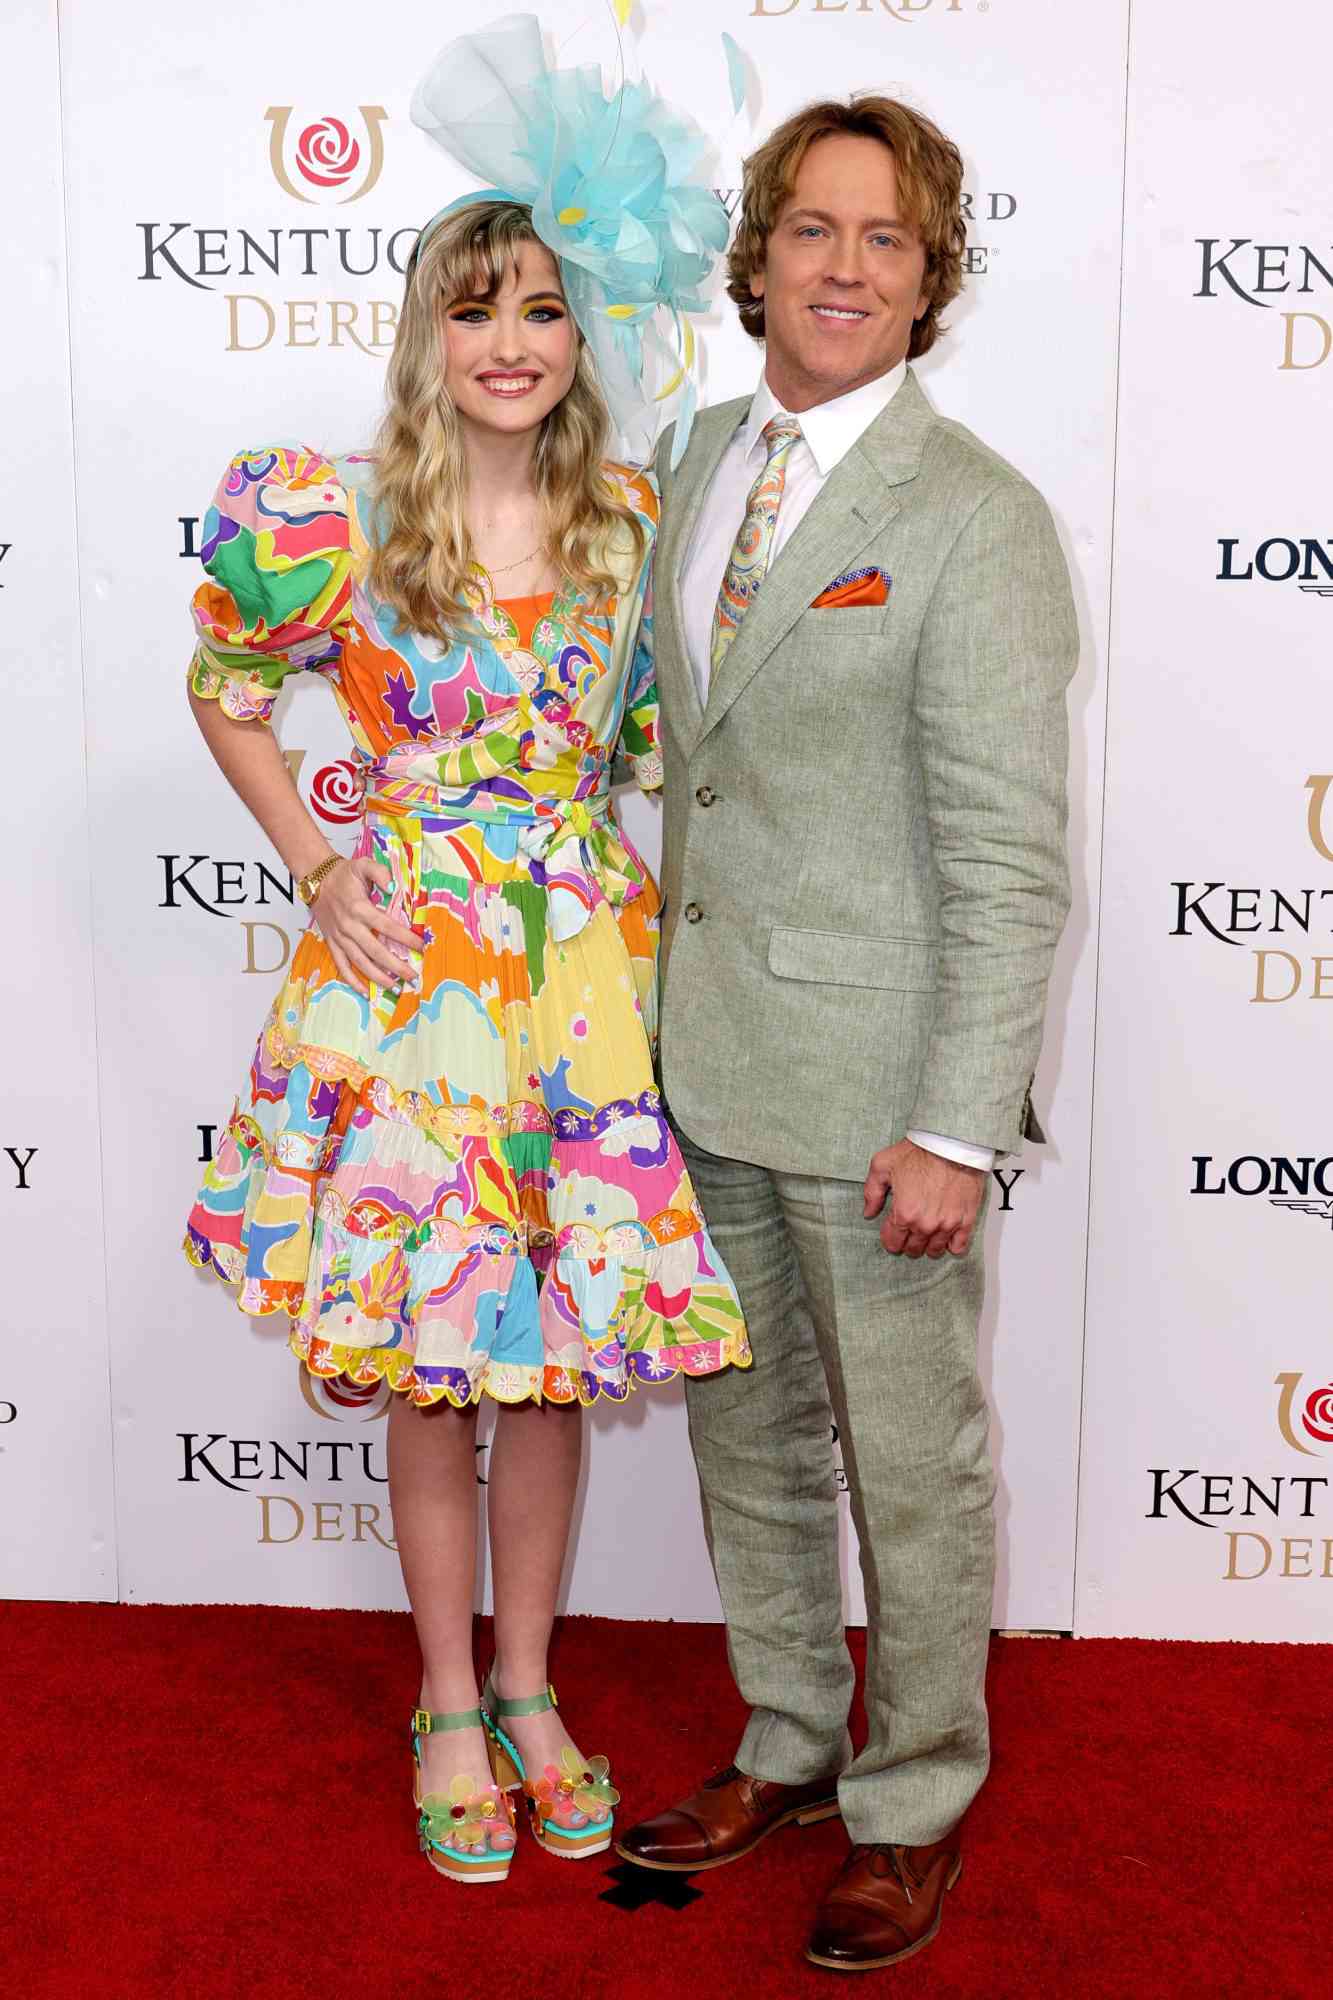 LOUISVILLE, KENTUCKY - MAY 07: Dannielynn Birkhead and Larry Birkhead attend the 148th Kentucky Derby at Churchill Downs on May 07, 2022 in Louisville, Kentucky. (Photo by Michael Loccisano/Getty Images for Churchill Downs)